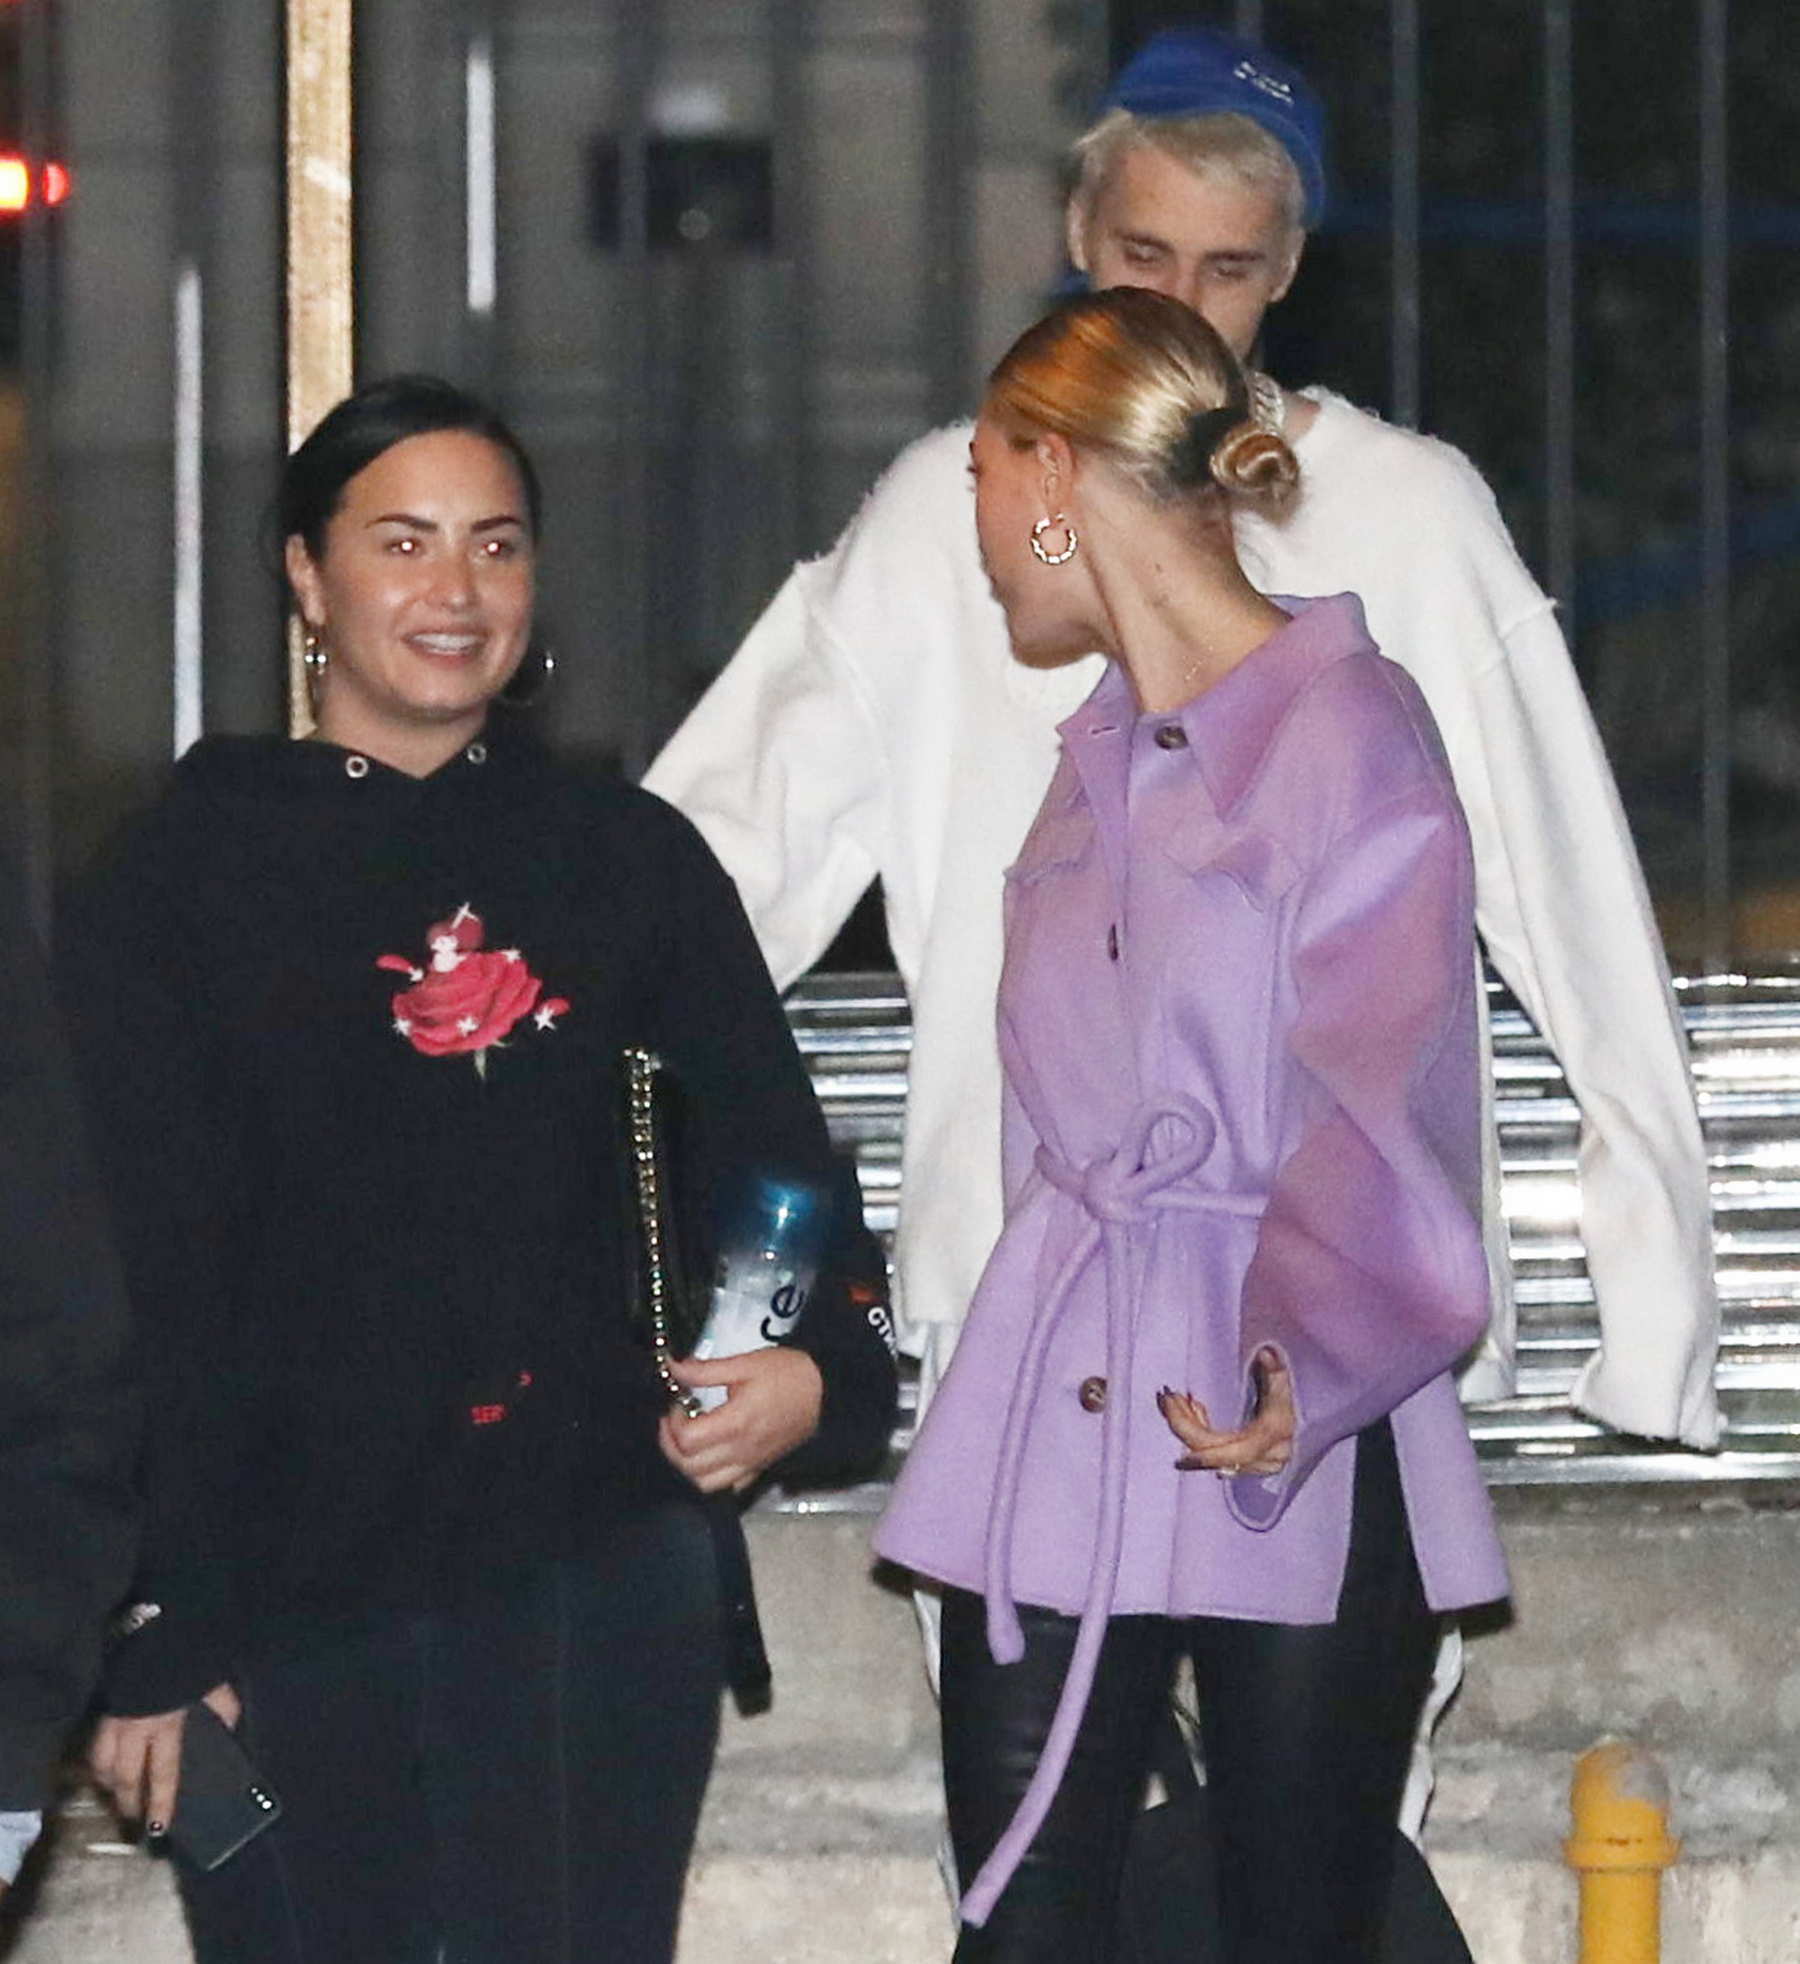 With_Justin_and_Hailey_going_to_a_night_church_service_together_in_Los_Angeles2C_CA_-_December_187.jpg